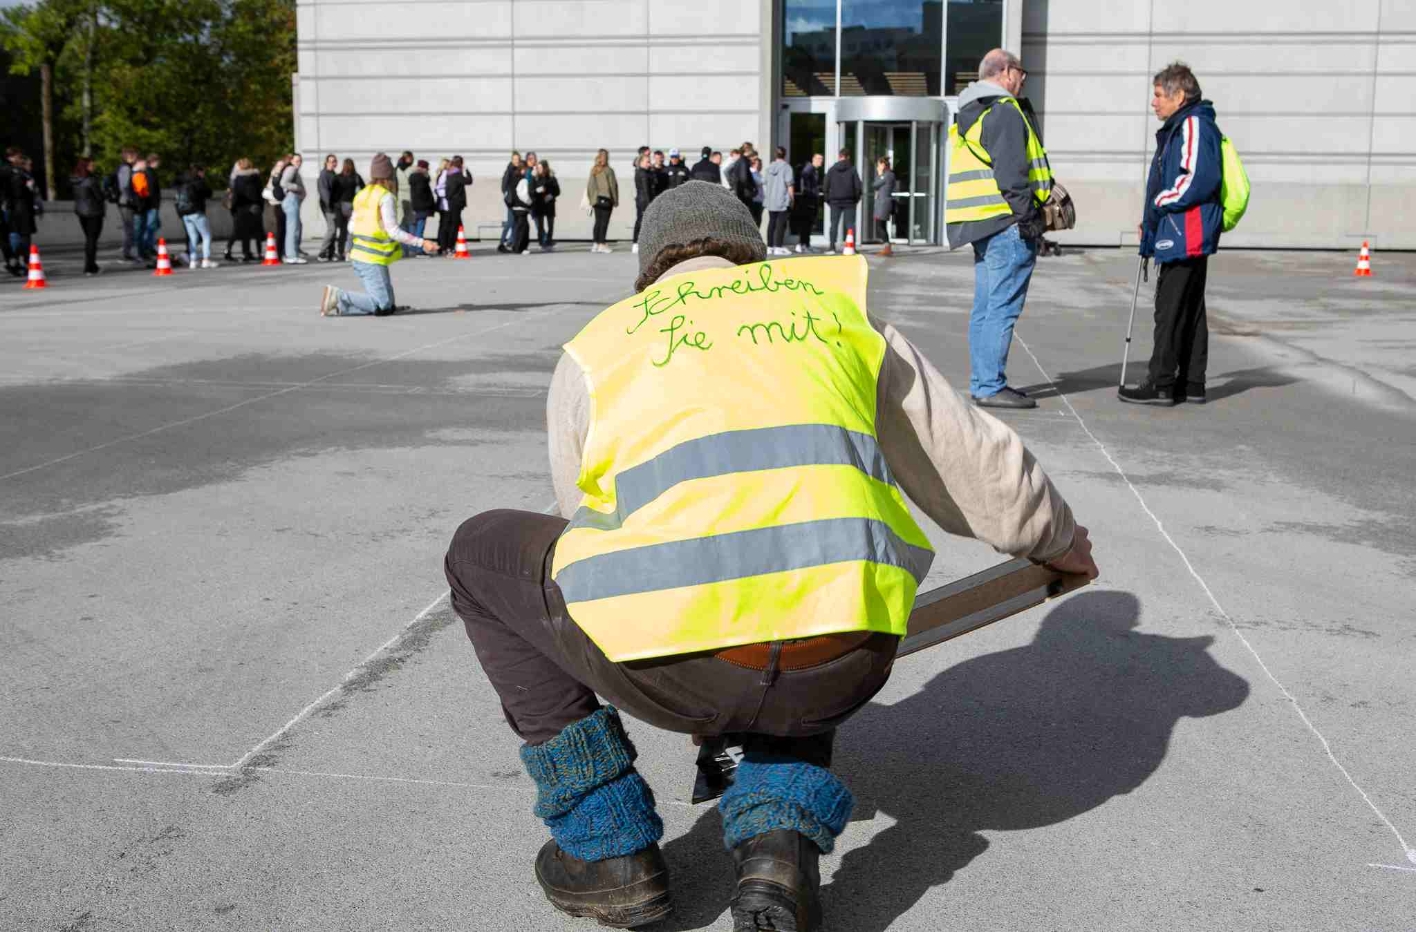 A man kneels on a stone square and wears a yellow high-visibility vest with the inscription "Write with" on his back. In his hands he holds a sticky board, which he puts straight in front of him. In the background, other people with high-visibility vests are standing and kneeling in the square.